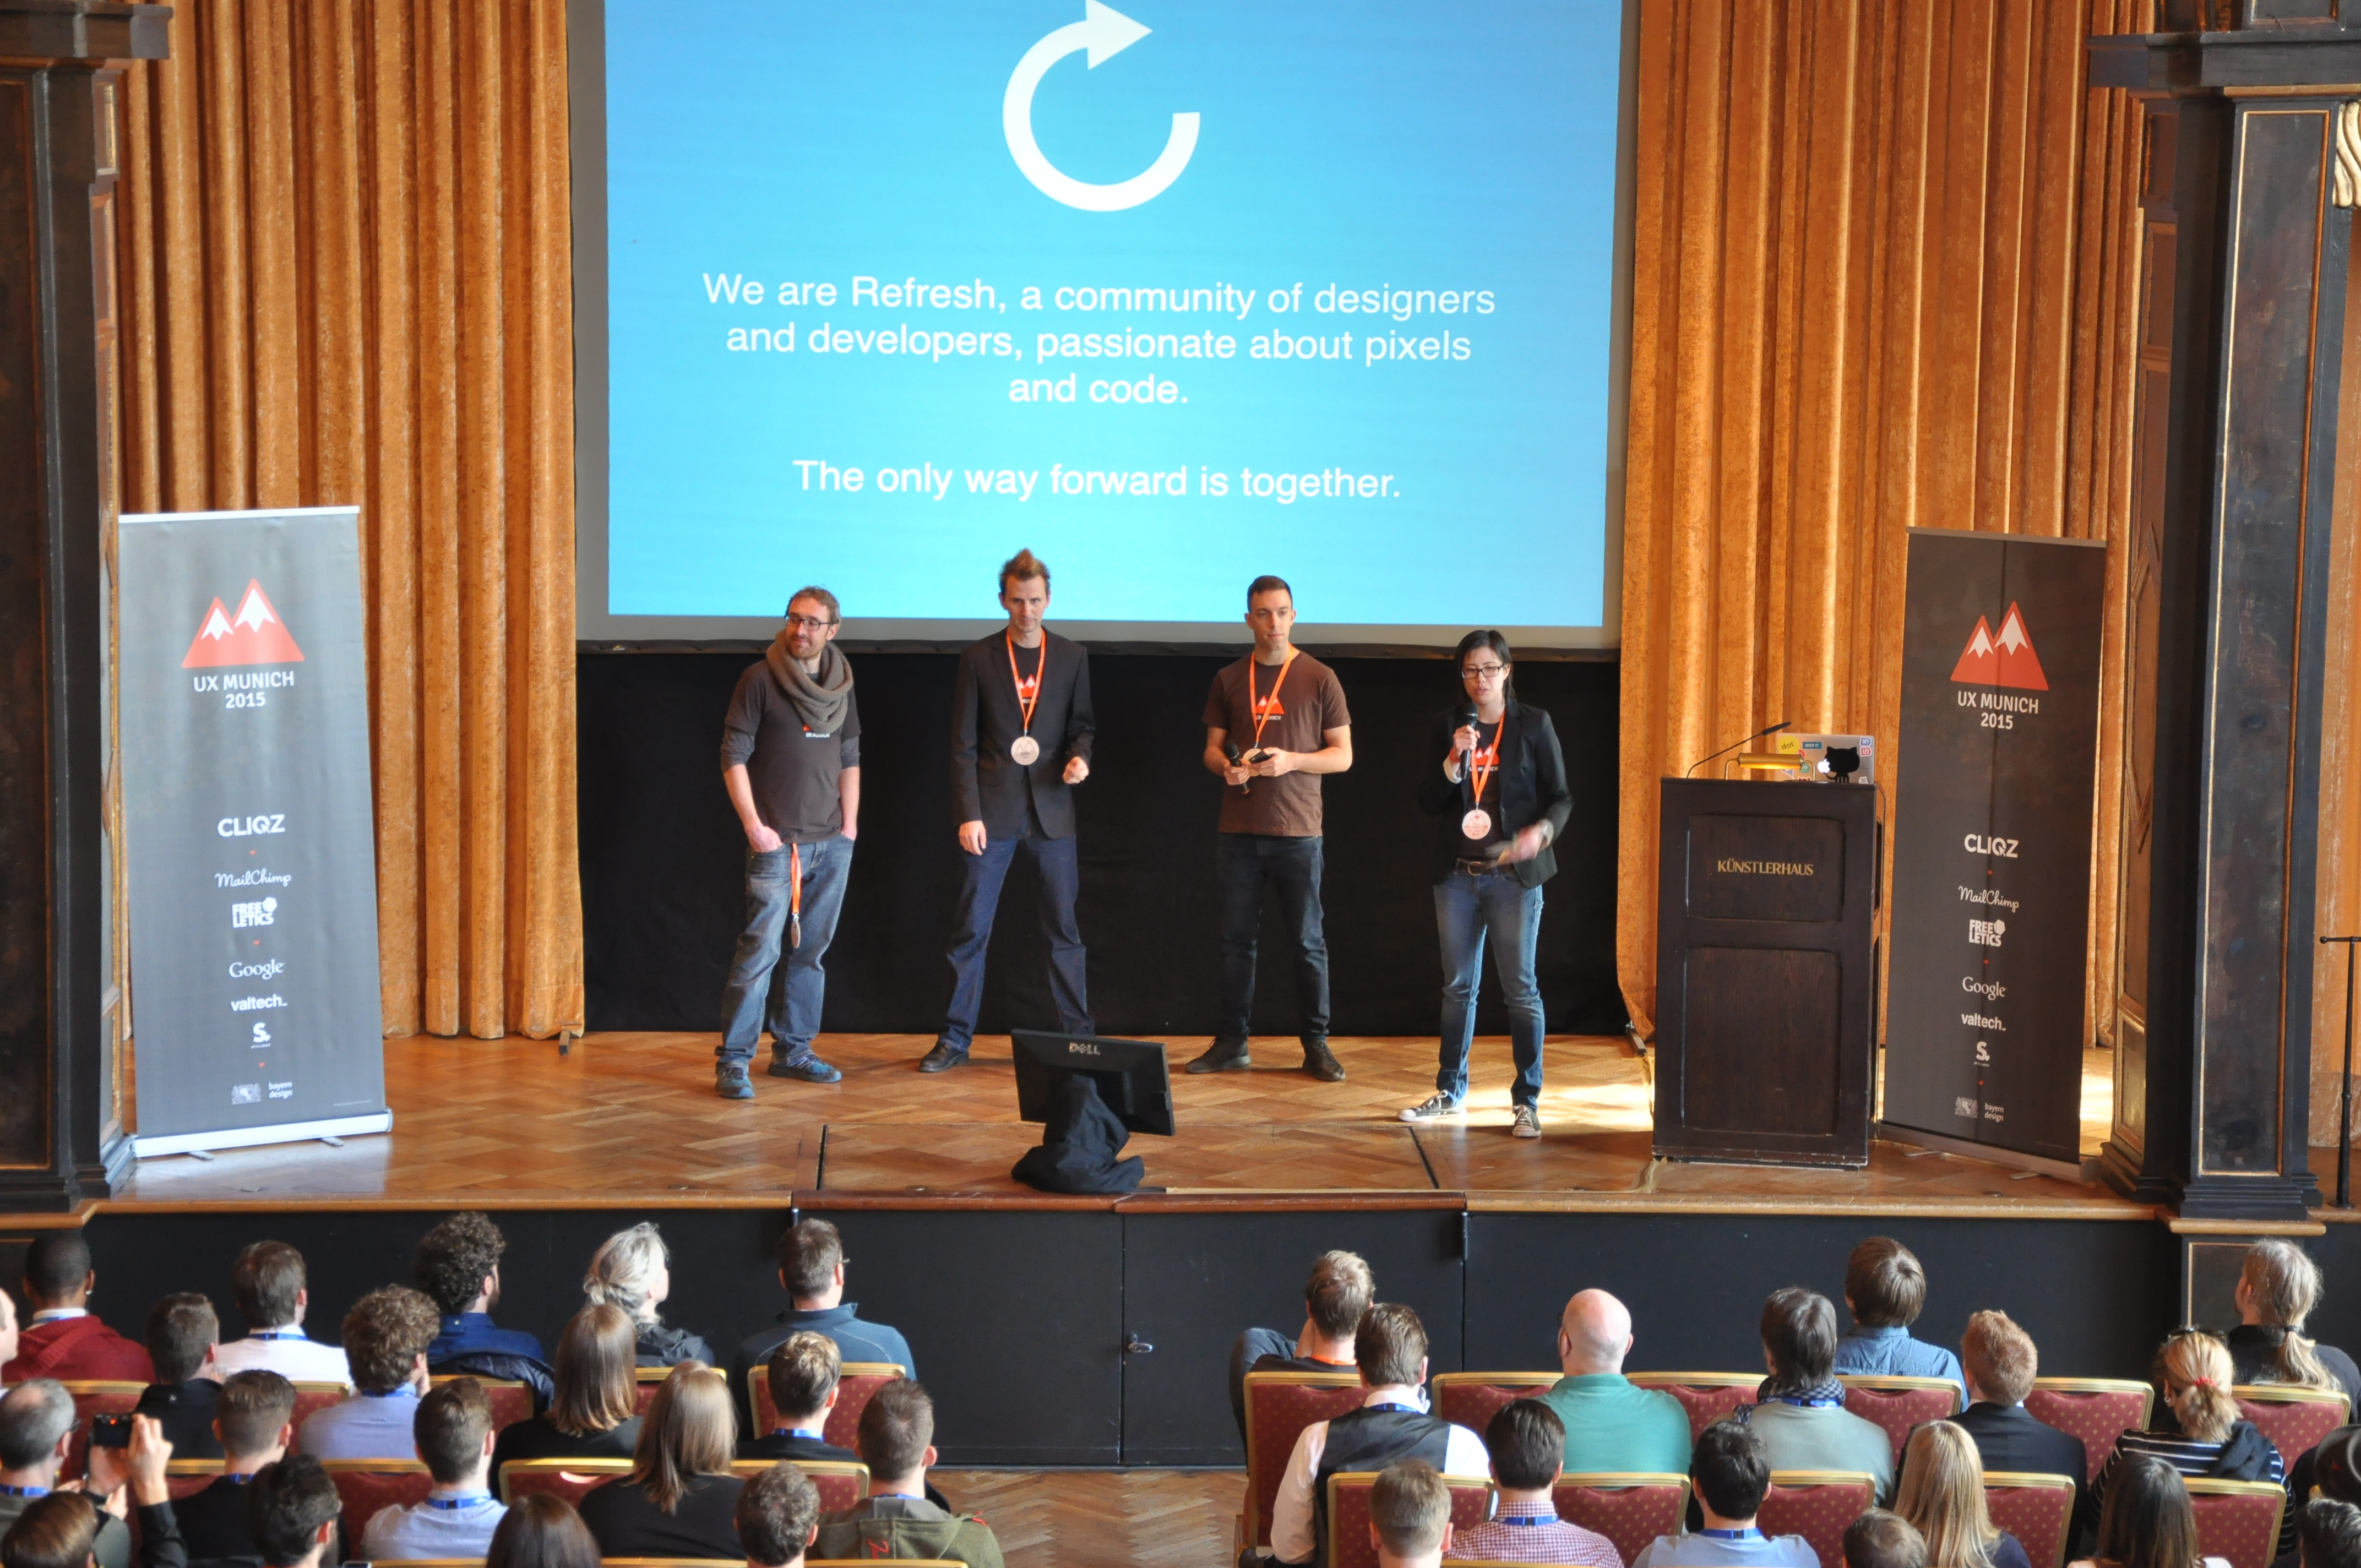 On stage at UX Munich 2015 with my co-founders and co-organizers